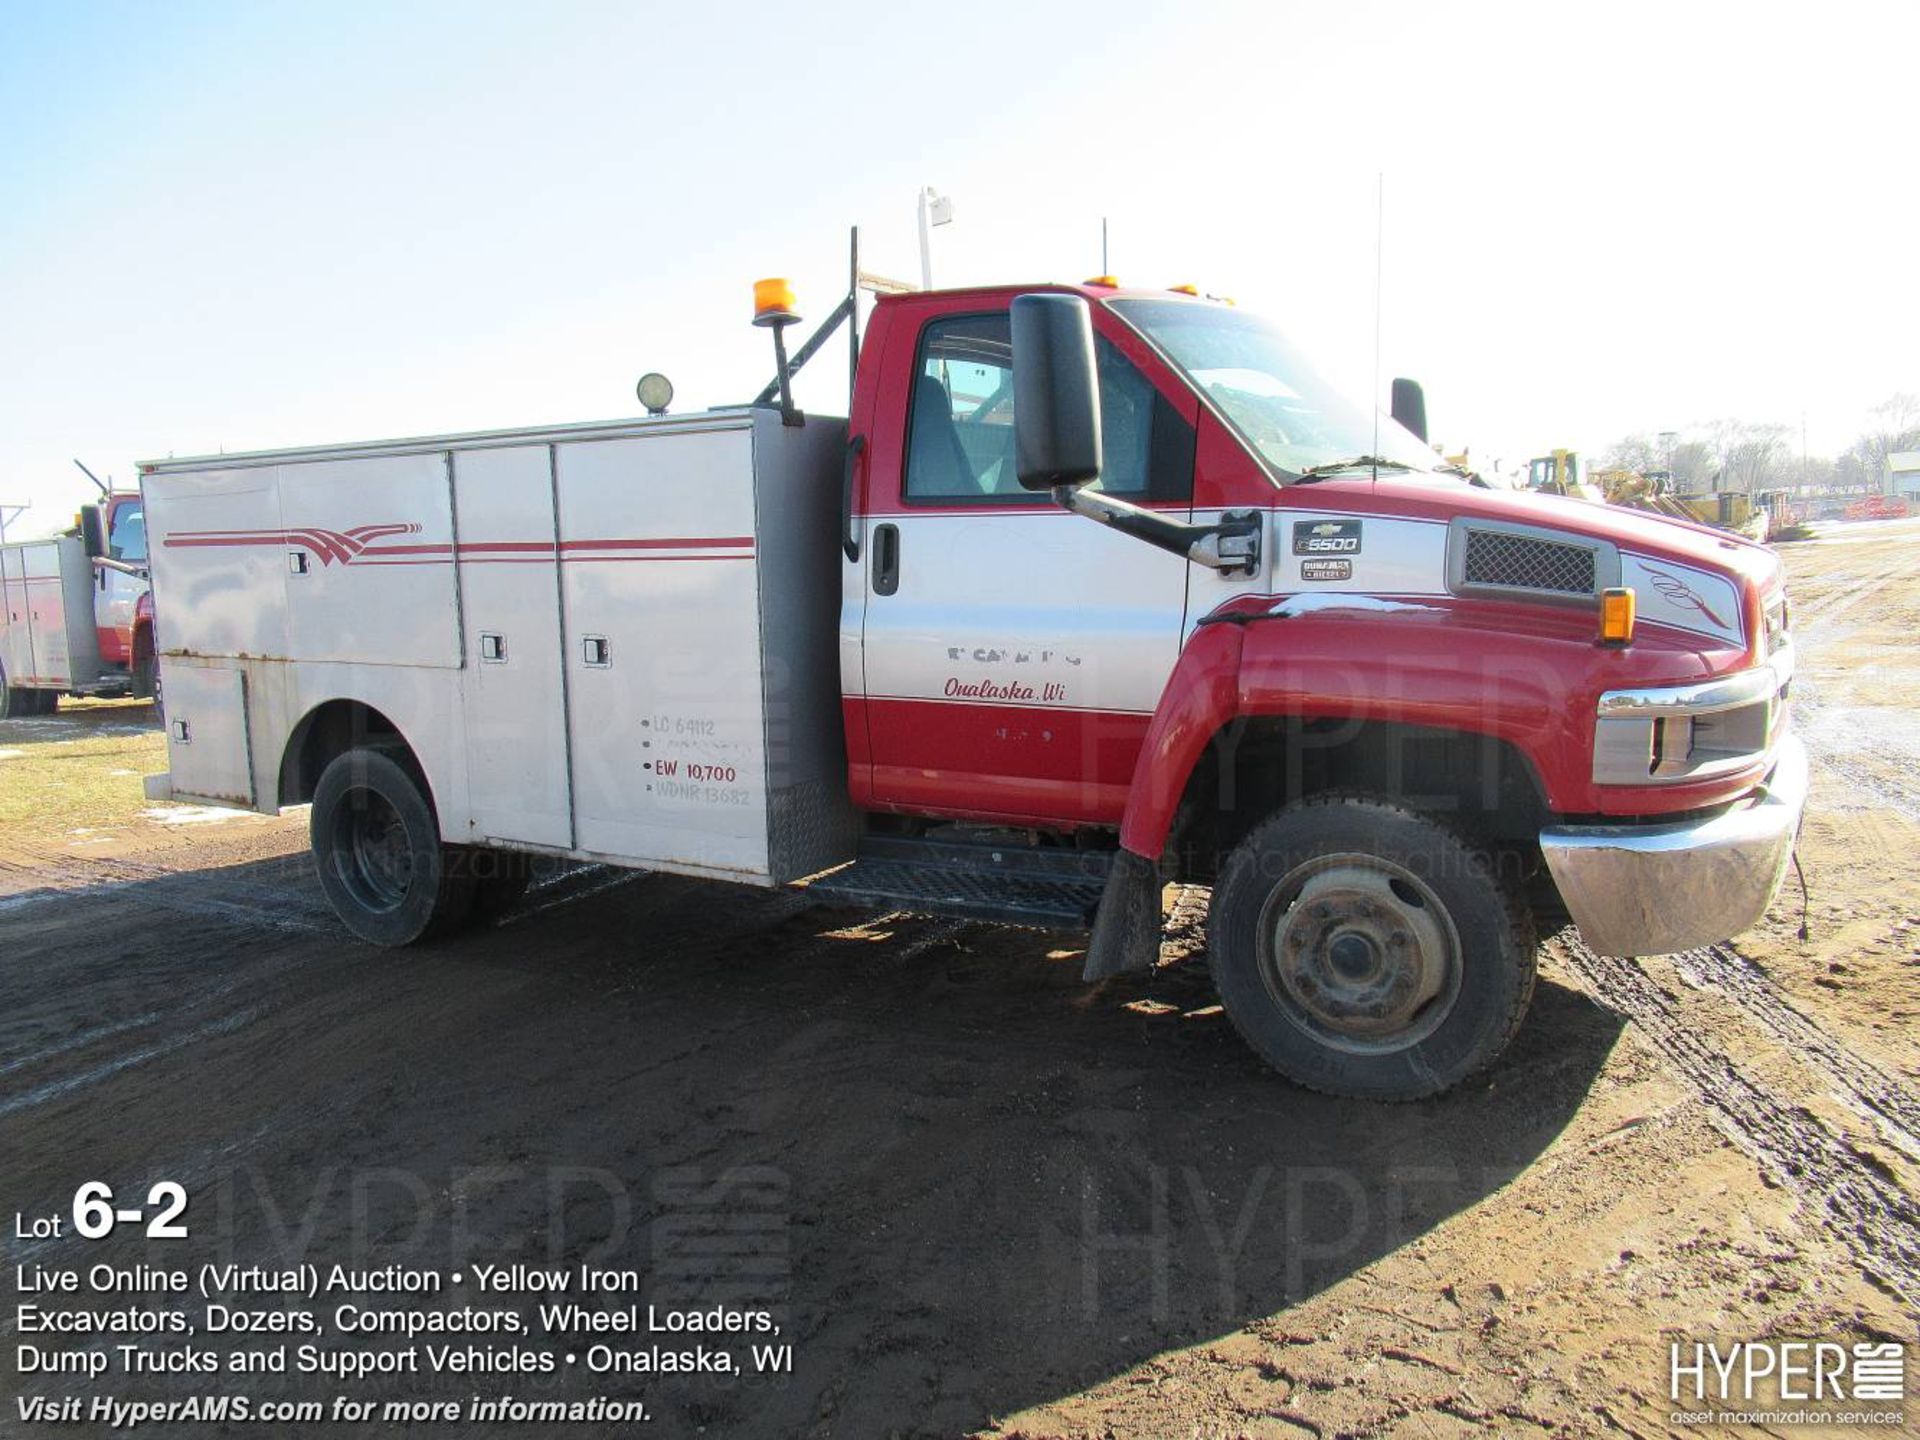 2003 Chevrolet C5500 Service Truck - Image 2 of 11